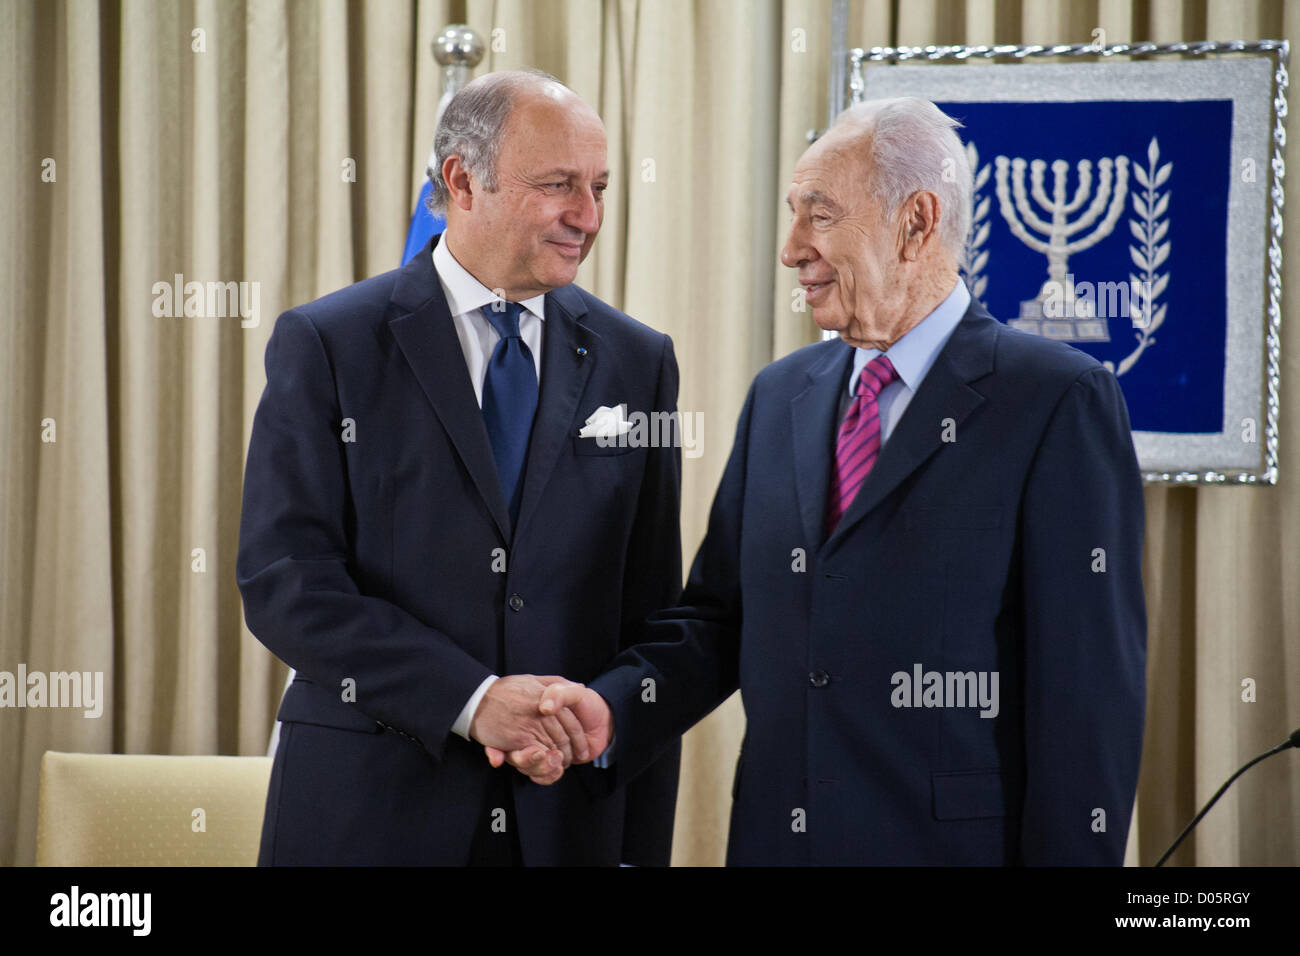 Israeli President Shimon Peres and French Foreign Minister Laurent Fabius shake hands at the opening of a joint meeting. Jerusalem, Israel. 18-Nov-2012.  Israeli President Shimon Peres meets French Foreign Minister Laurent Fabius who is visiting the region for meetings with the leaders of Israel and the Palestinian Authority in light of warfare in Gaza. Stock Photo